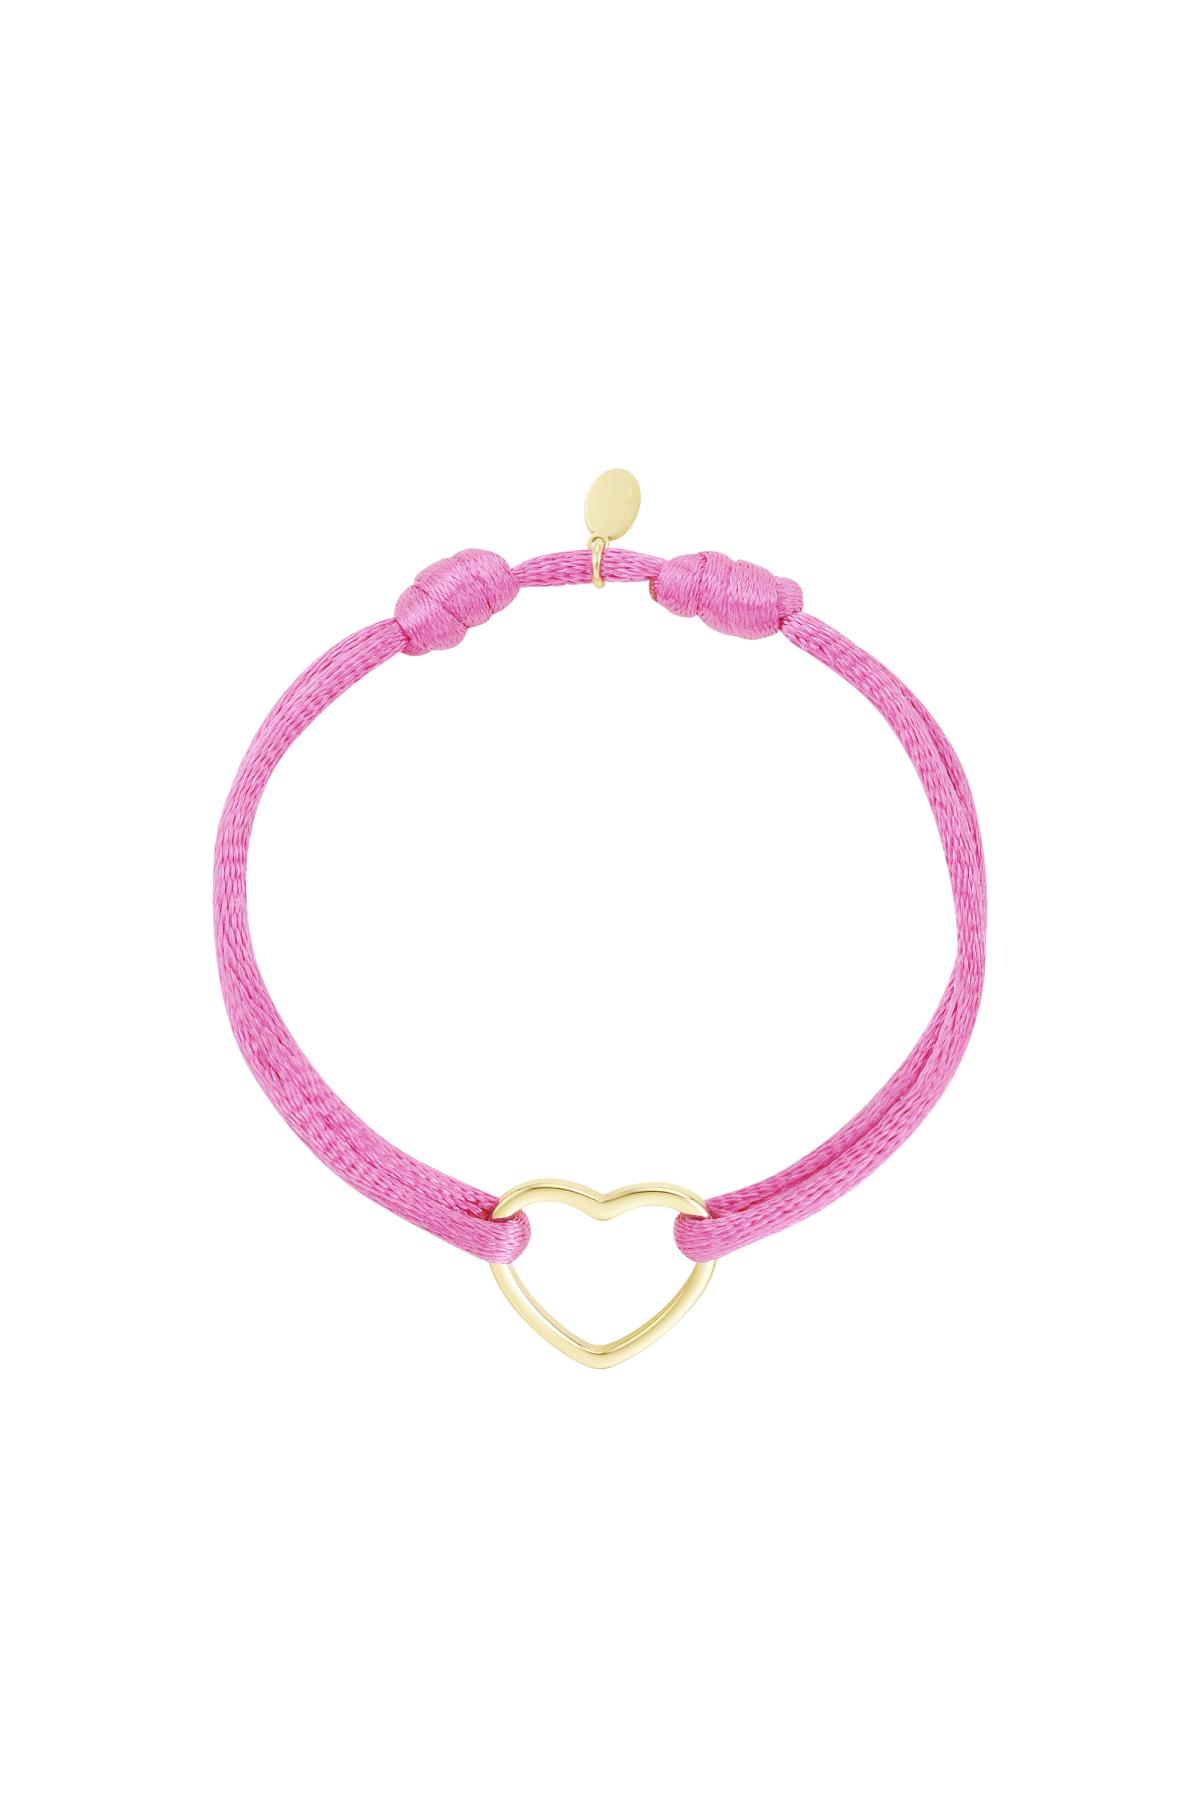 Bracciale in tessuto cuore Pink Stainless Steel h5 